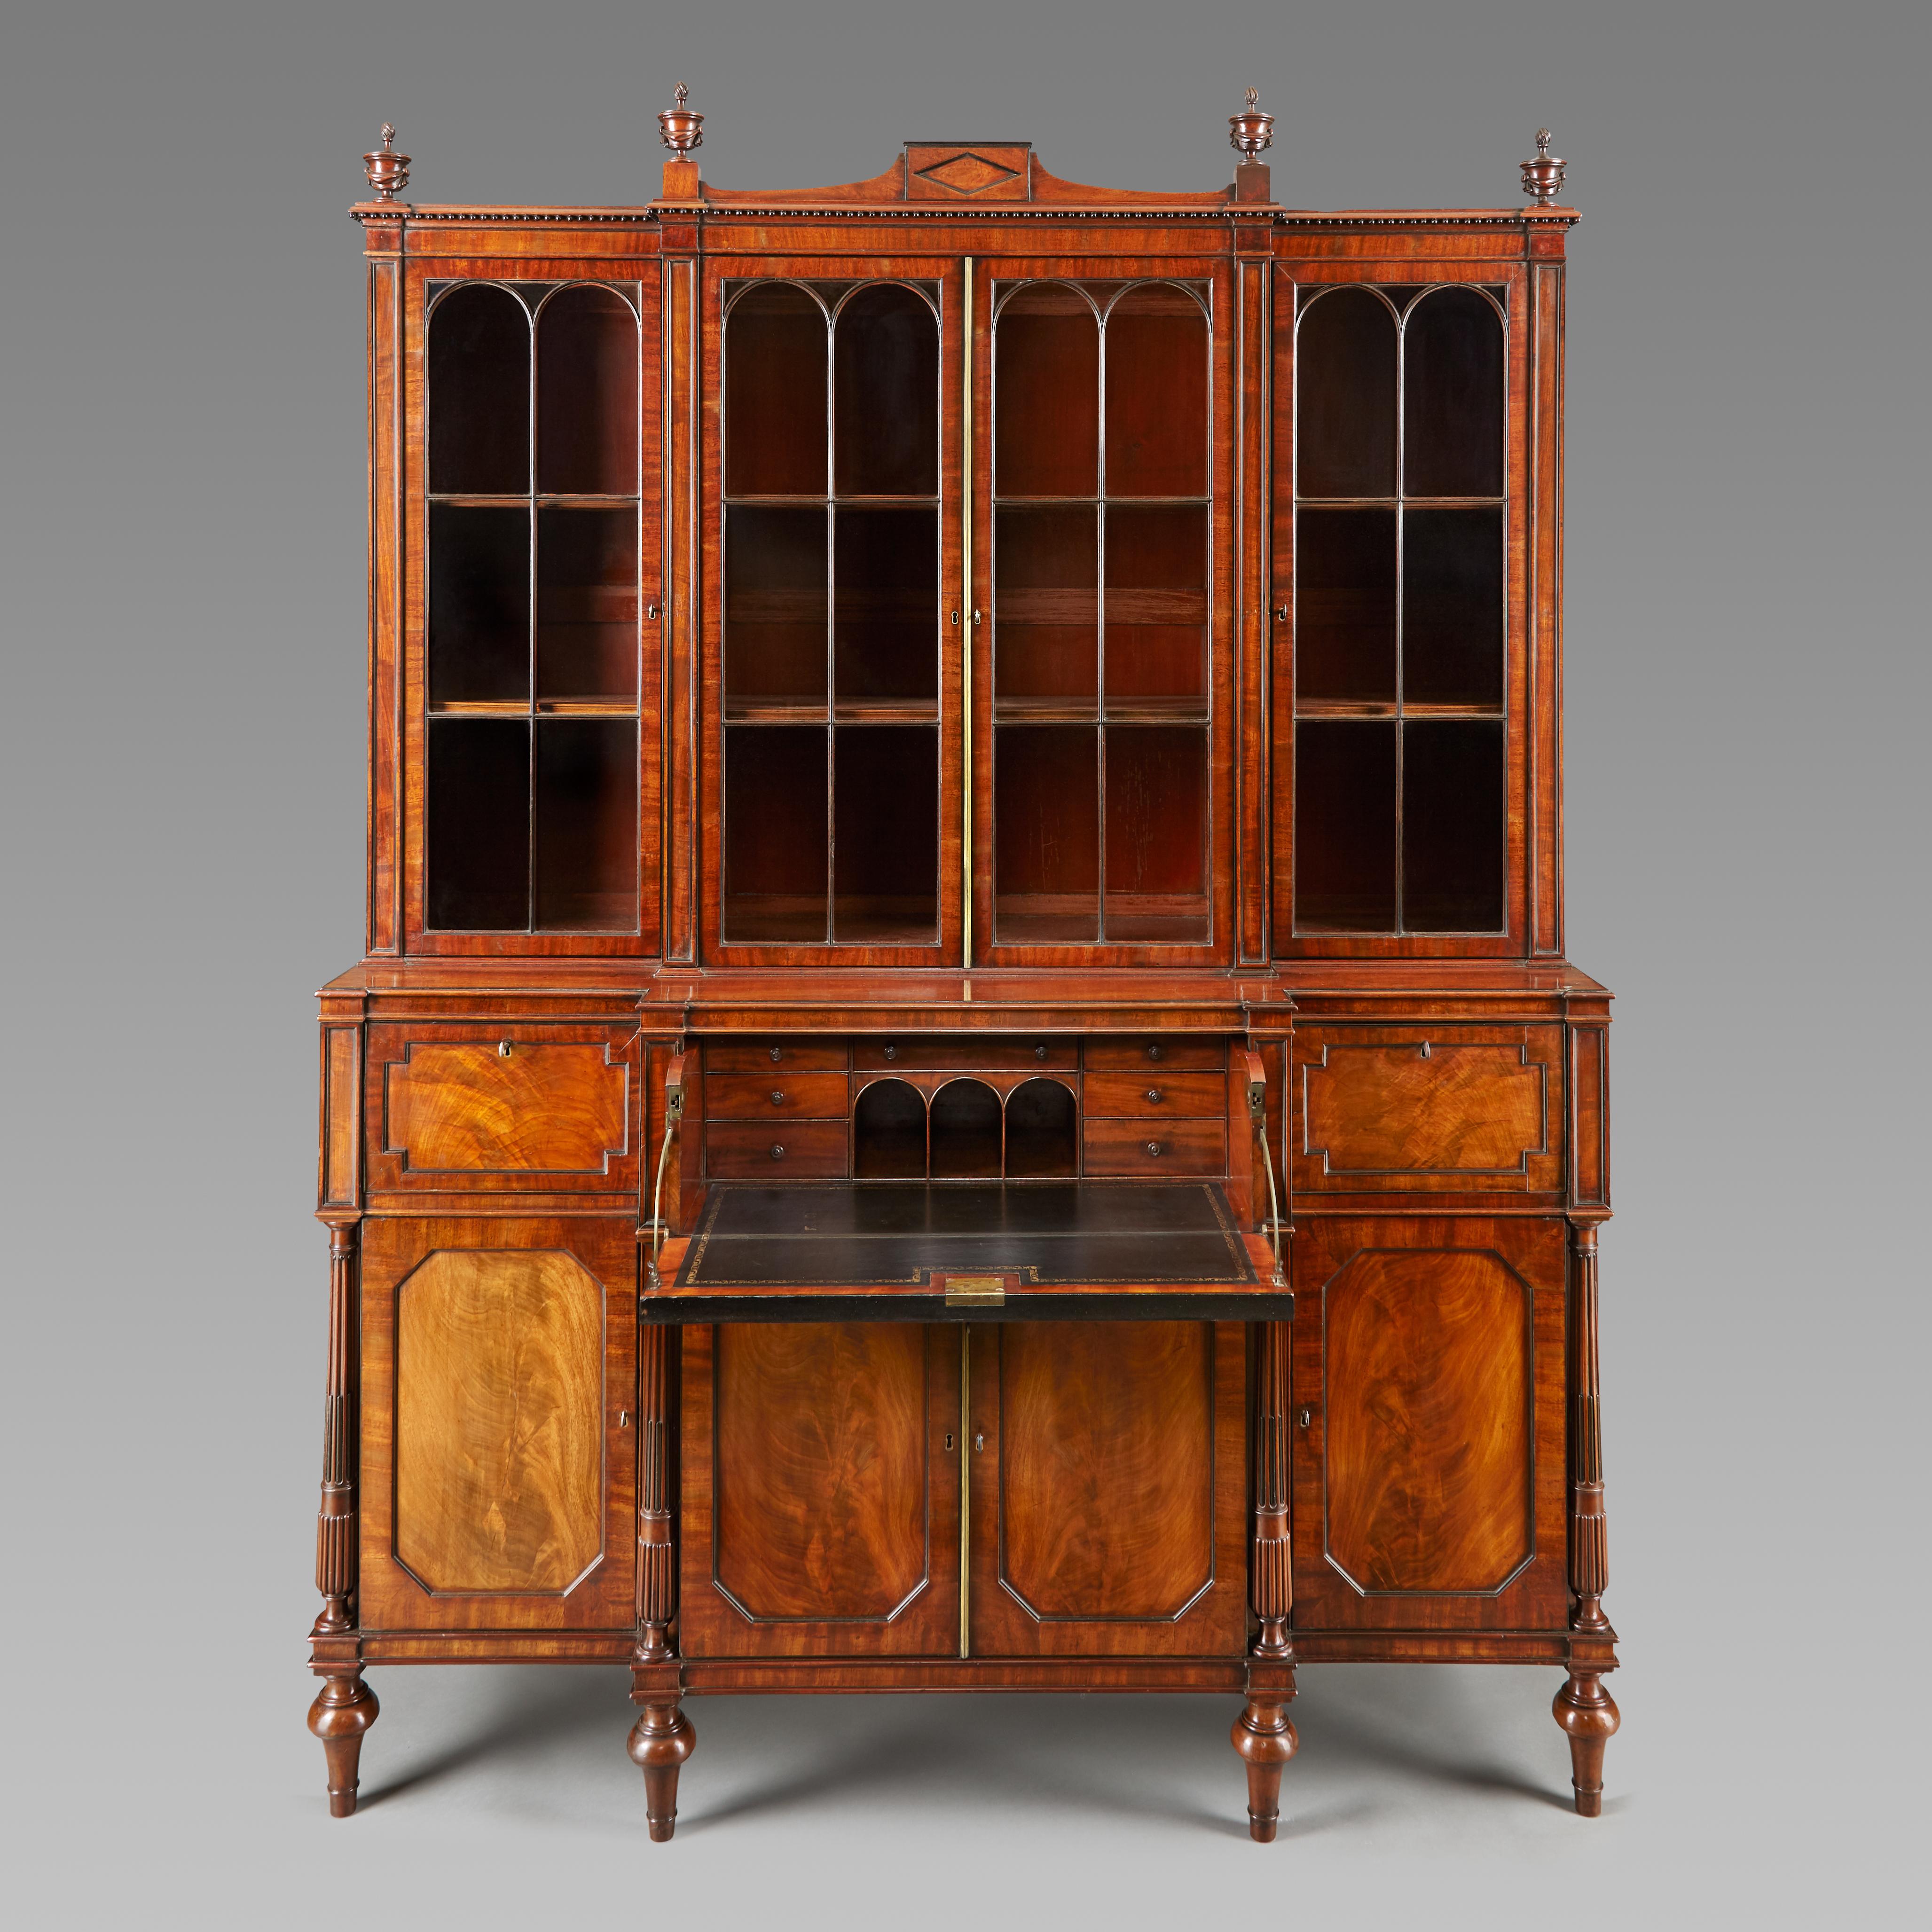 British Exceptional George III Period Mahogany Breakfront Bookcase or Display Cabinet For Sale